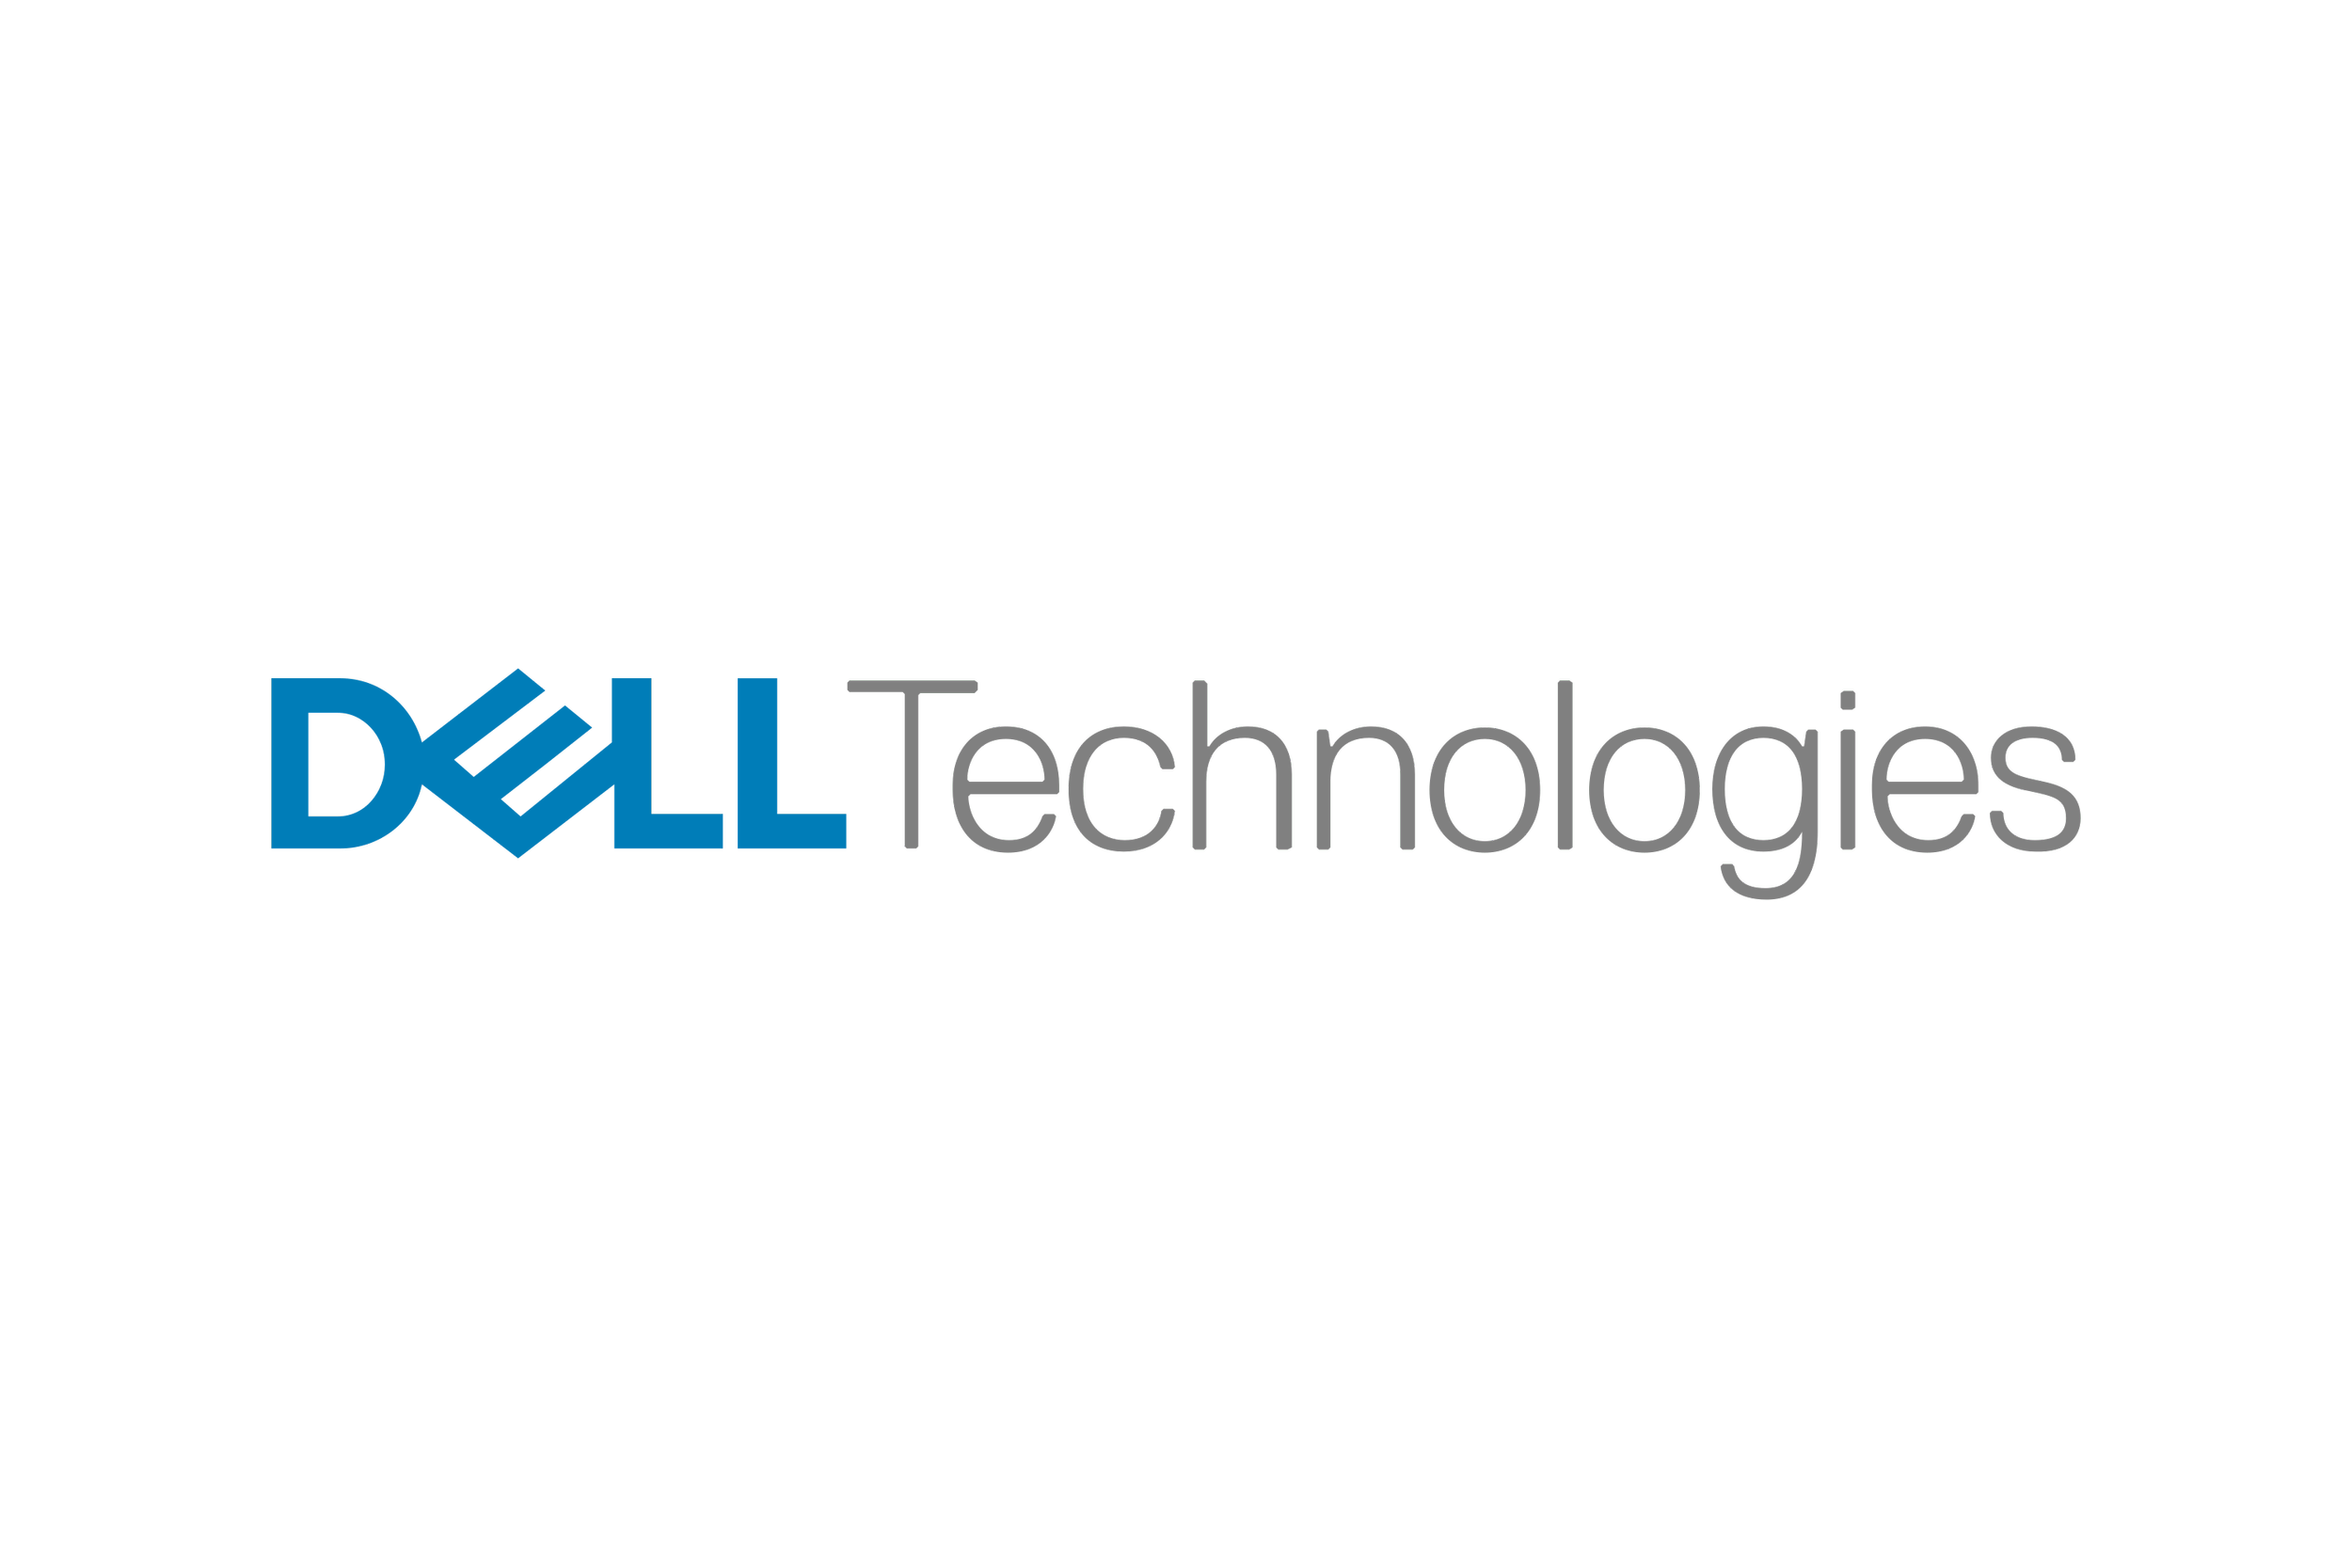 Dell_Technologies-Logo.wine.png